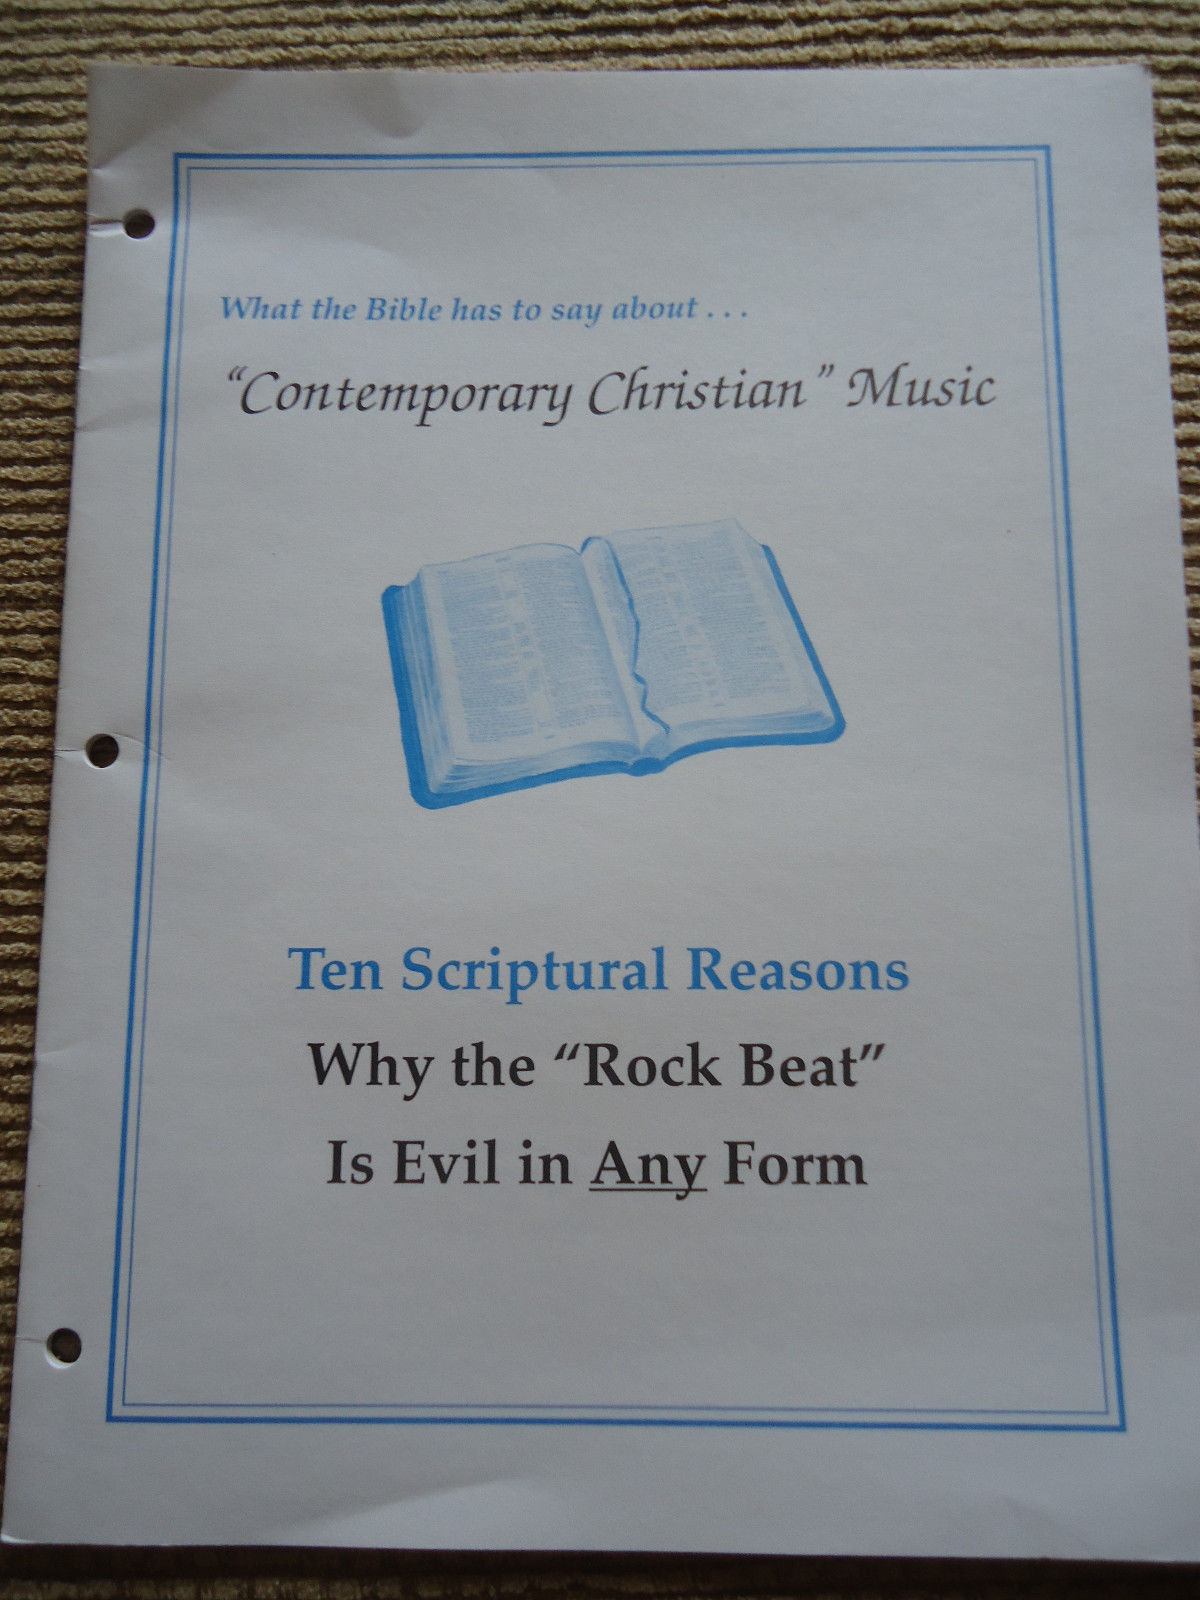 What the Bible has to say about Contemporary Christian Music